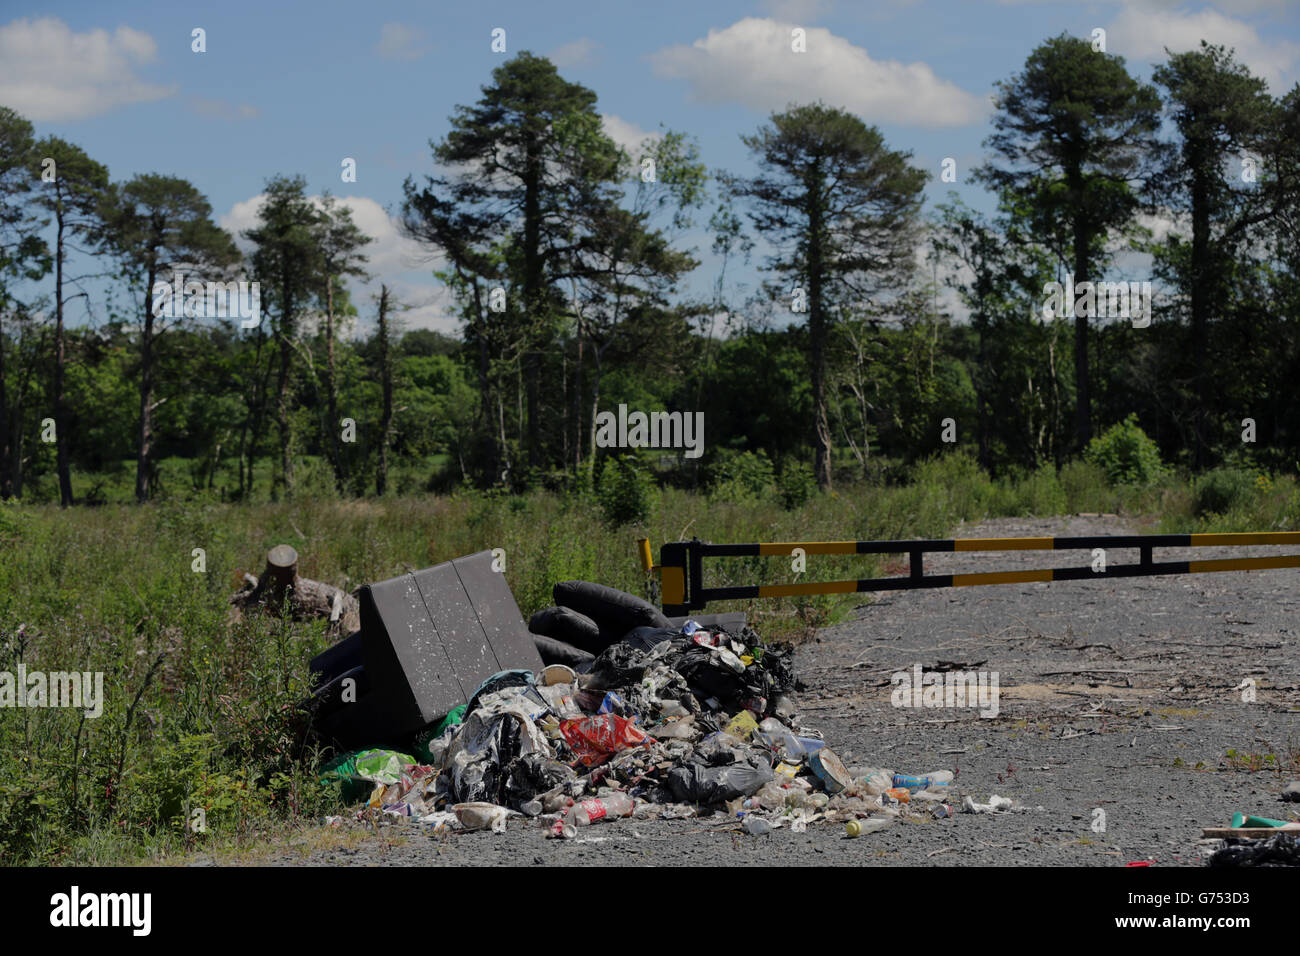 Rubbish which has been fly-tipped at the side of the road in County Laoisr. Stock Photo